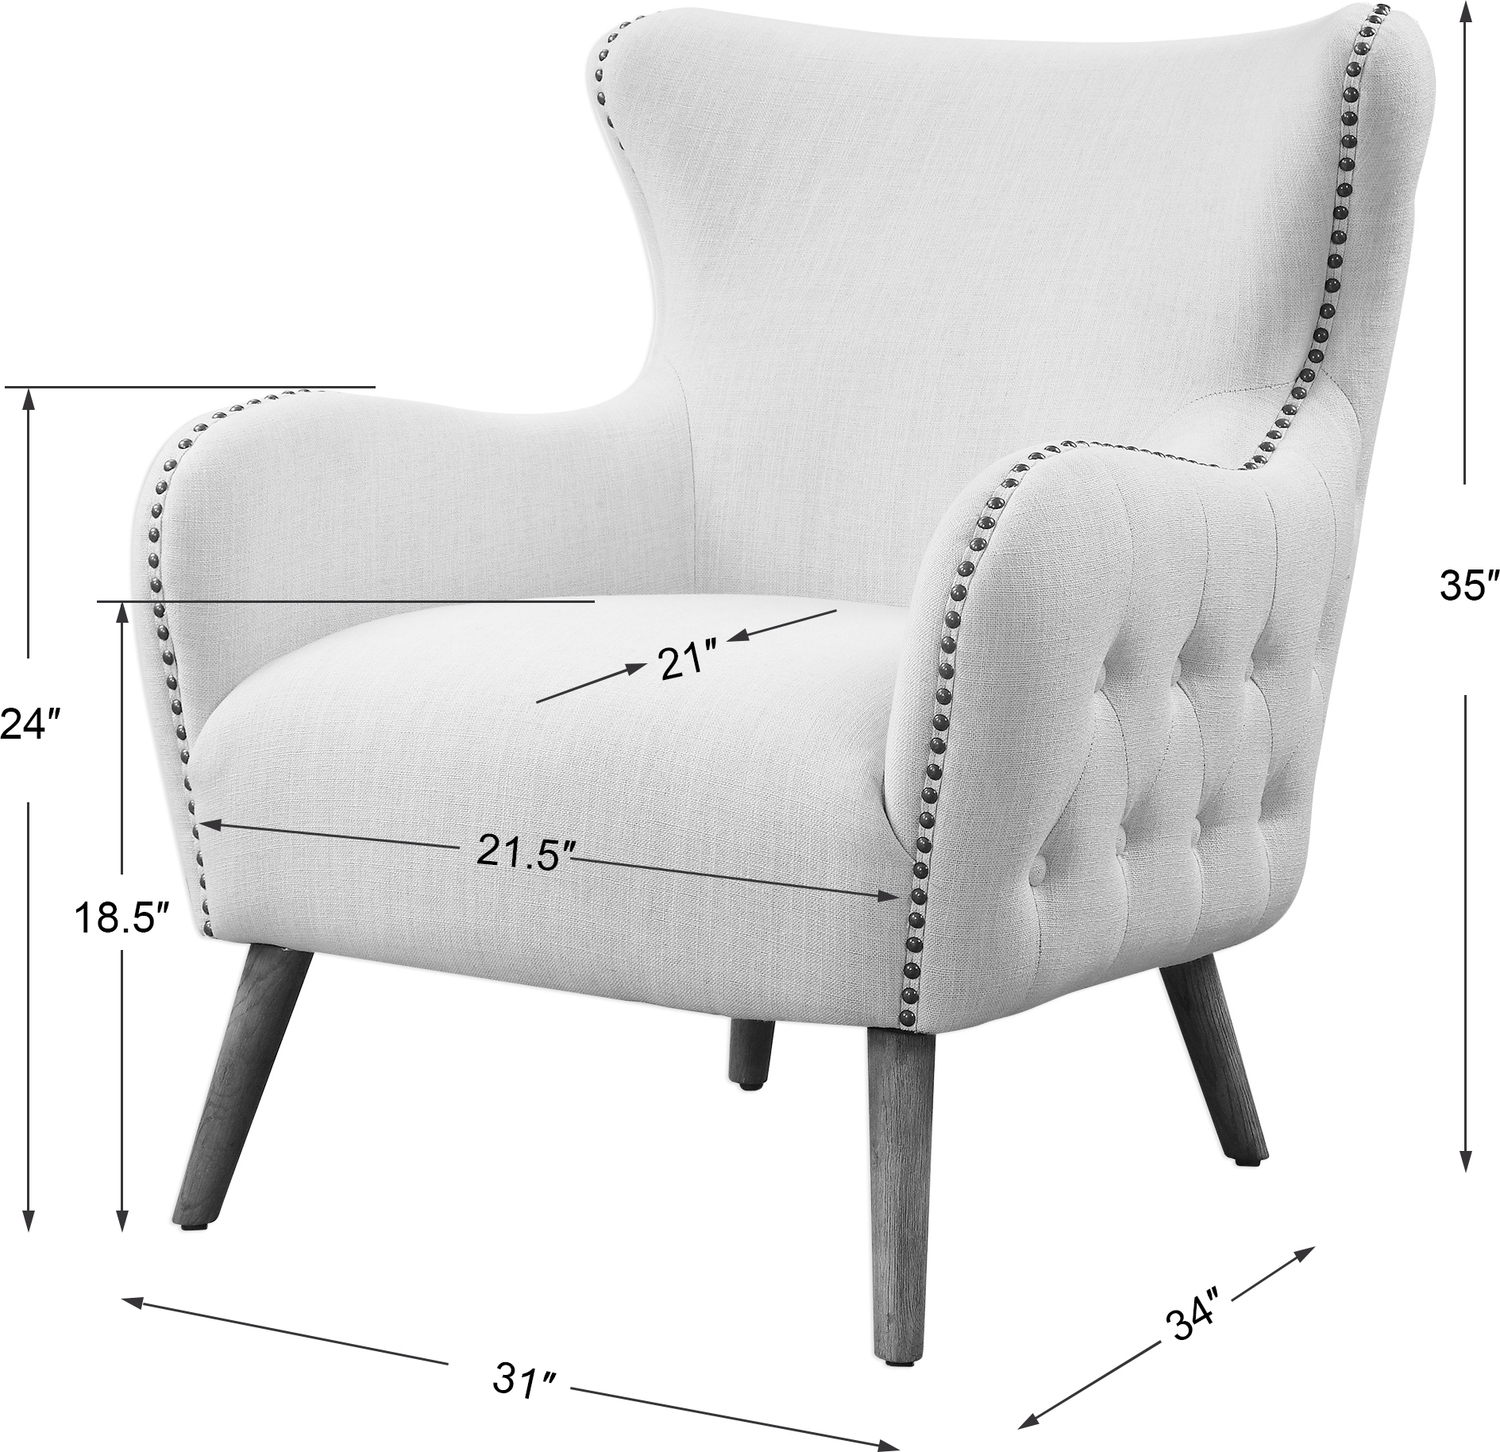 wingback chairs near me Uttermost  Accent Chairs & Armchairs Add Classic Elegance To A Space With This Wing Back Lounge Chair. Covered In A Cream Linen Blend Fabric, Complete With A Button Tufted Exterior And Trimmed With Antique Bronze Finished Nail Heads. The Accent Chair Is Set On Oak Finished Dowel Legs With A Lightly Applied Gray Wash, Showcasing The Natural Wood Grain. Seat Height Is 18".